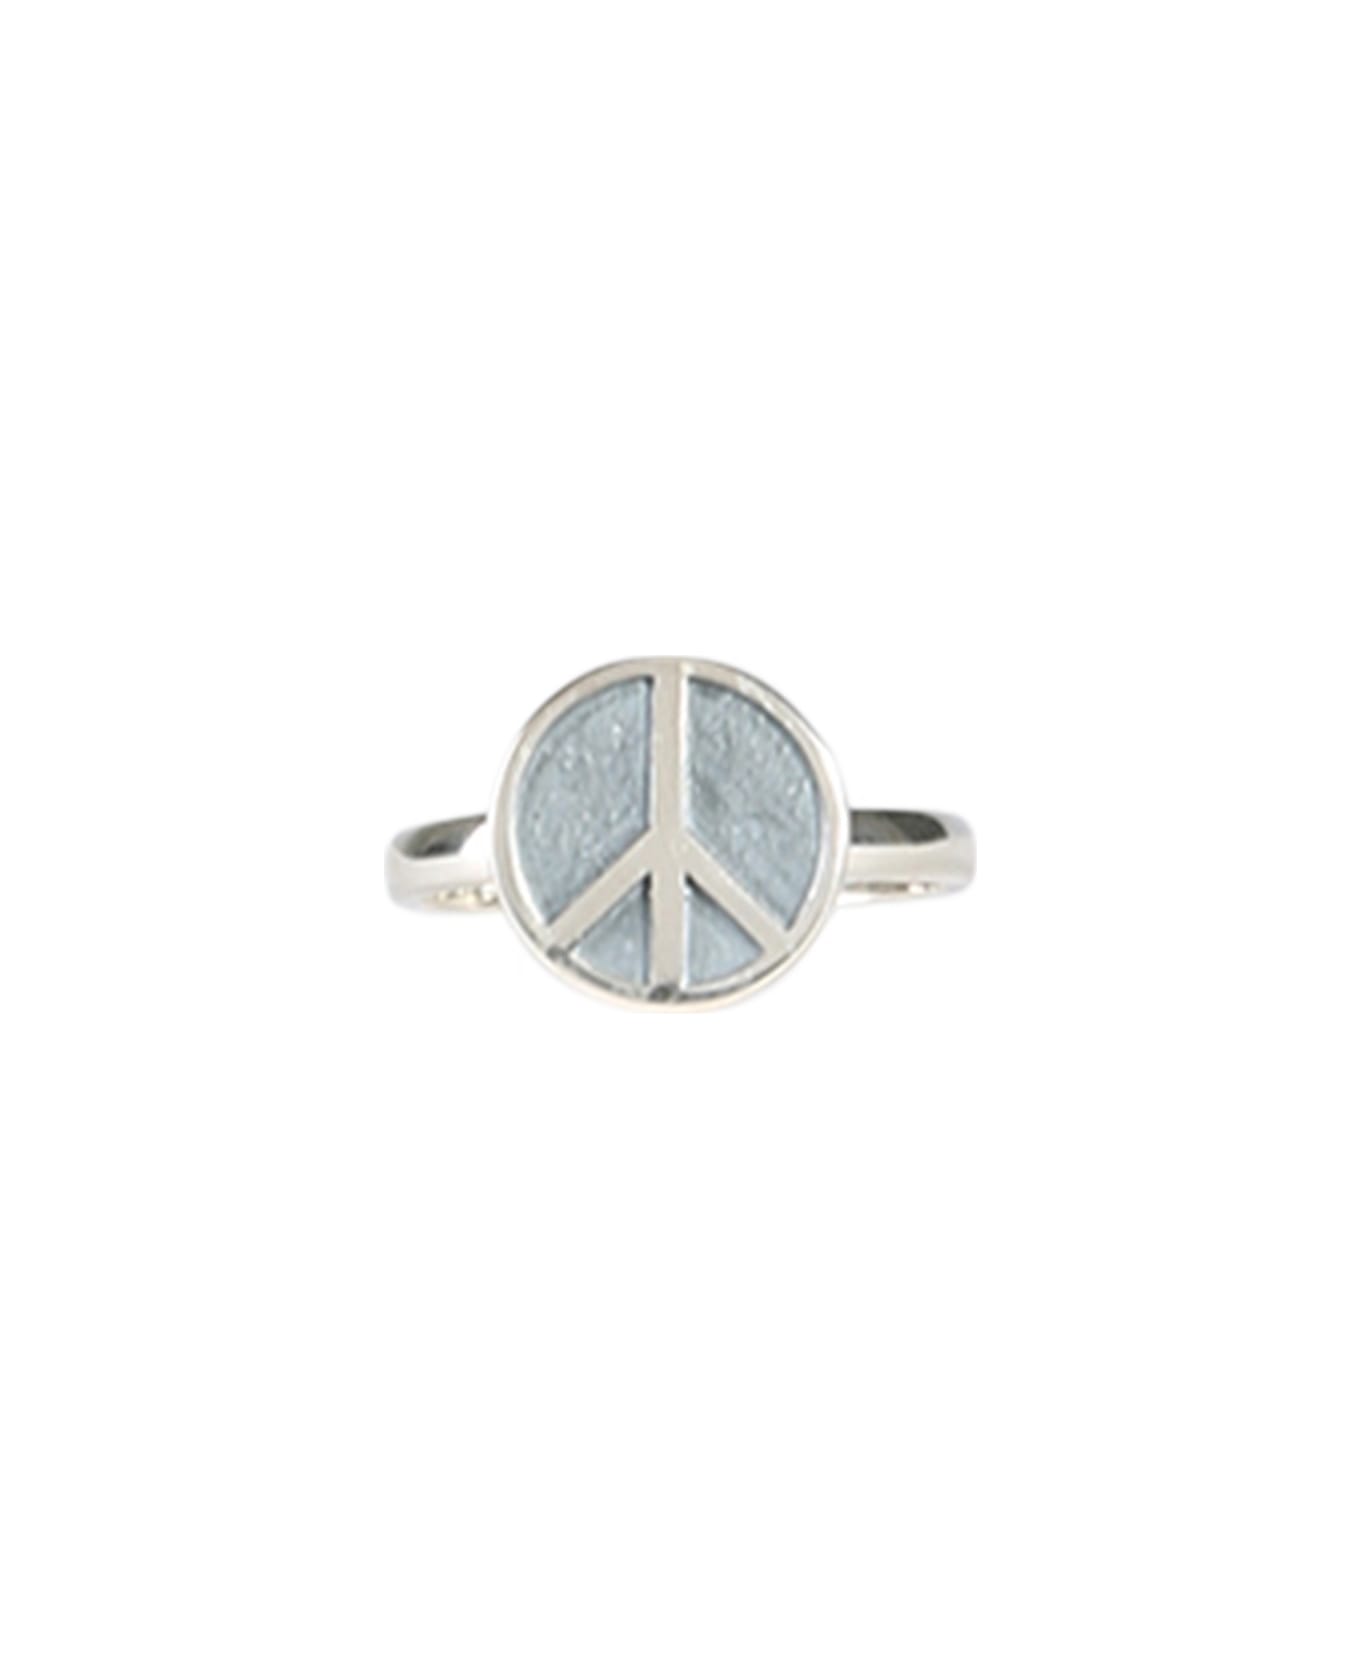 Needles Peace Ring - SILVER